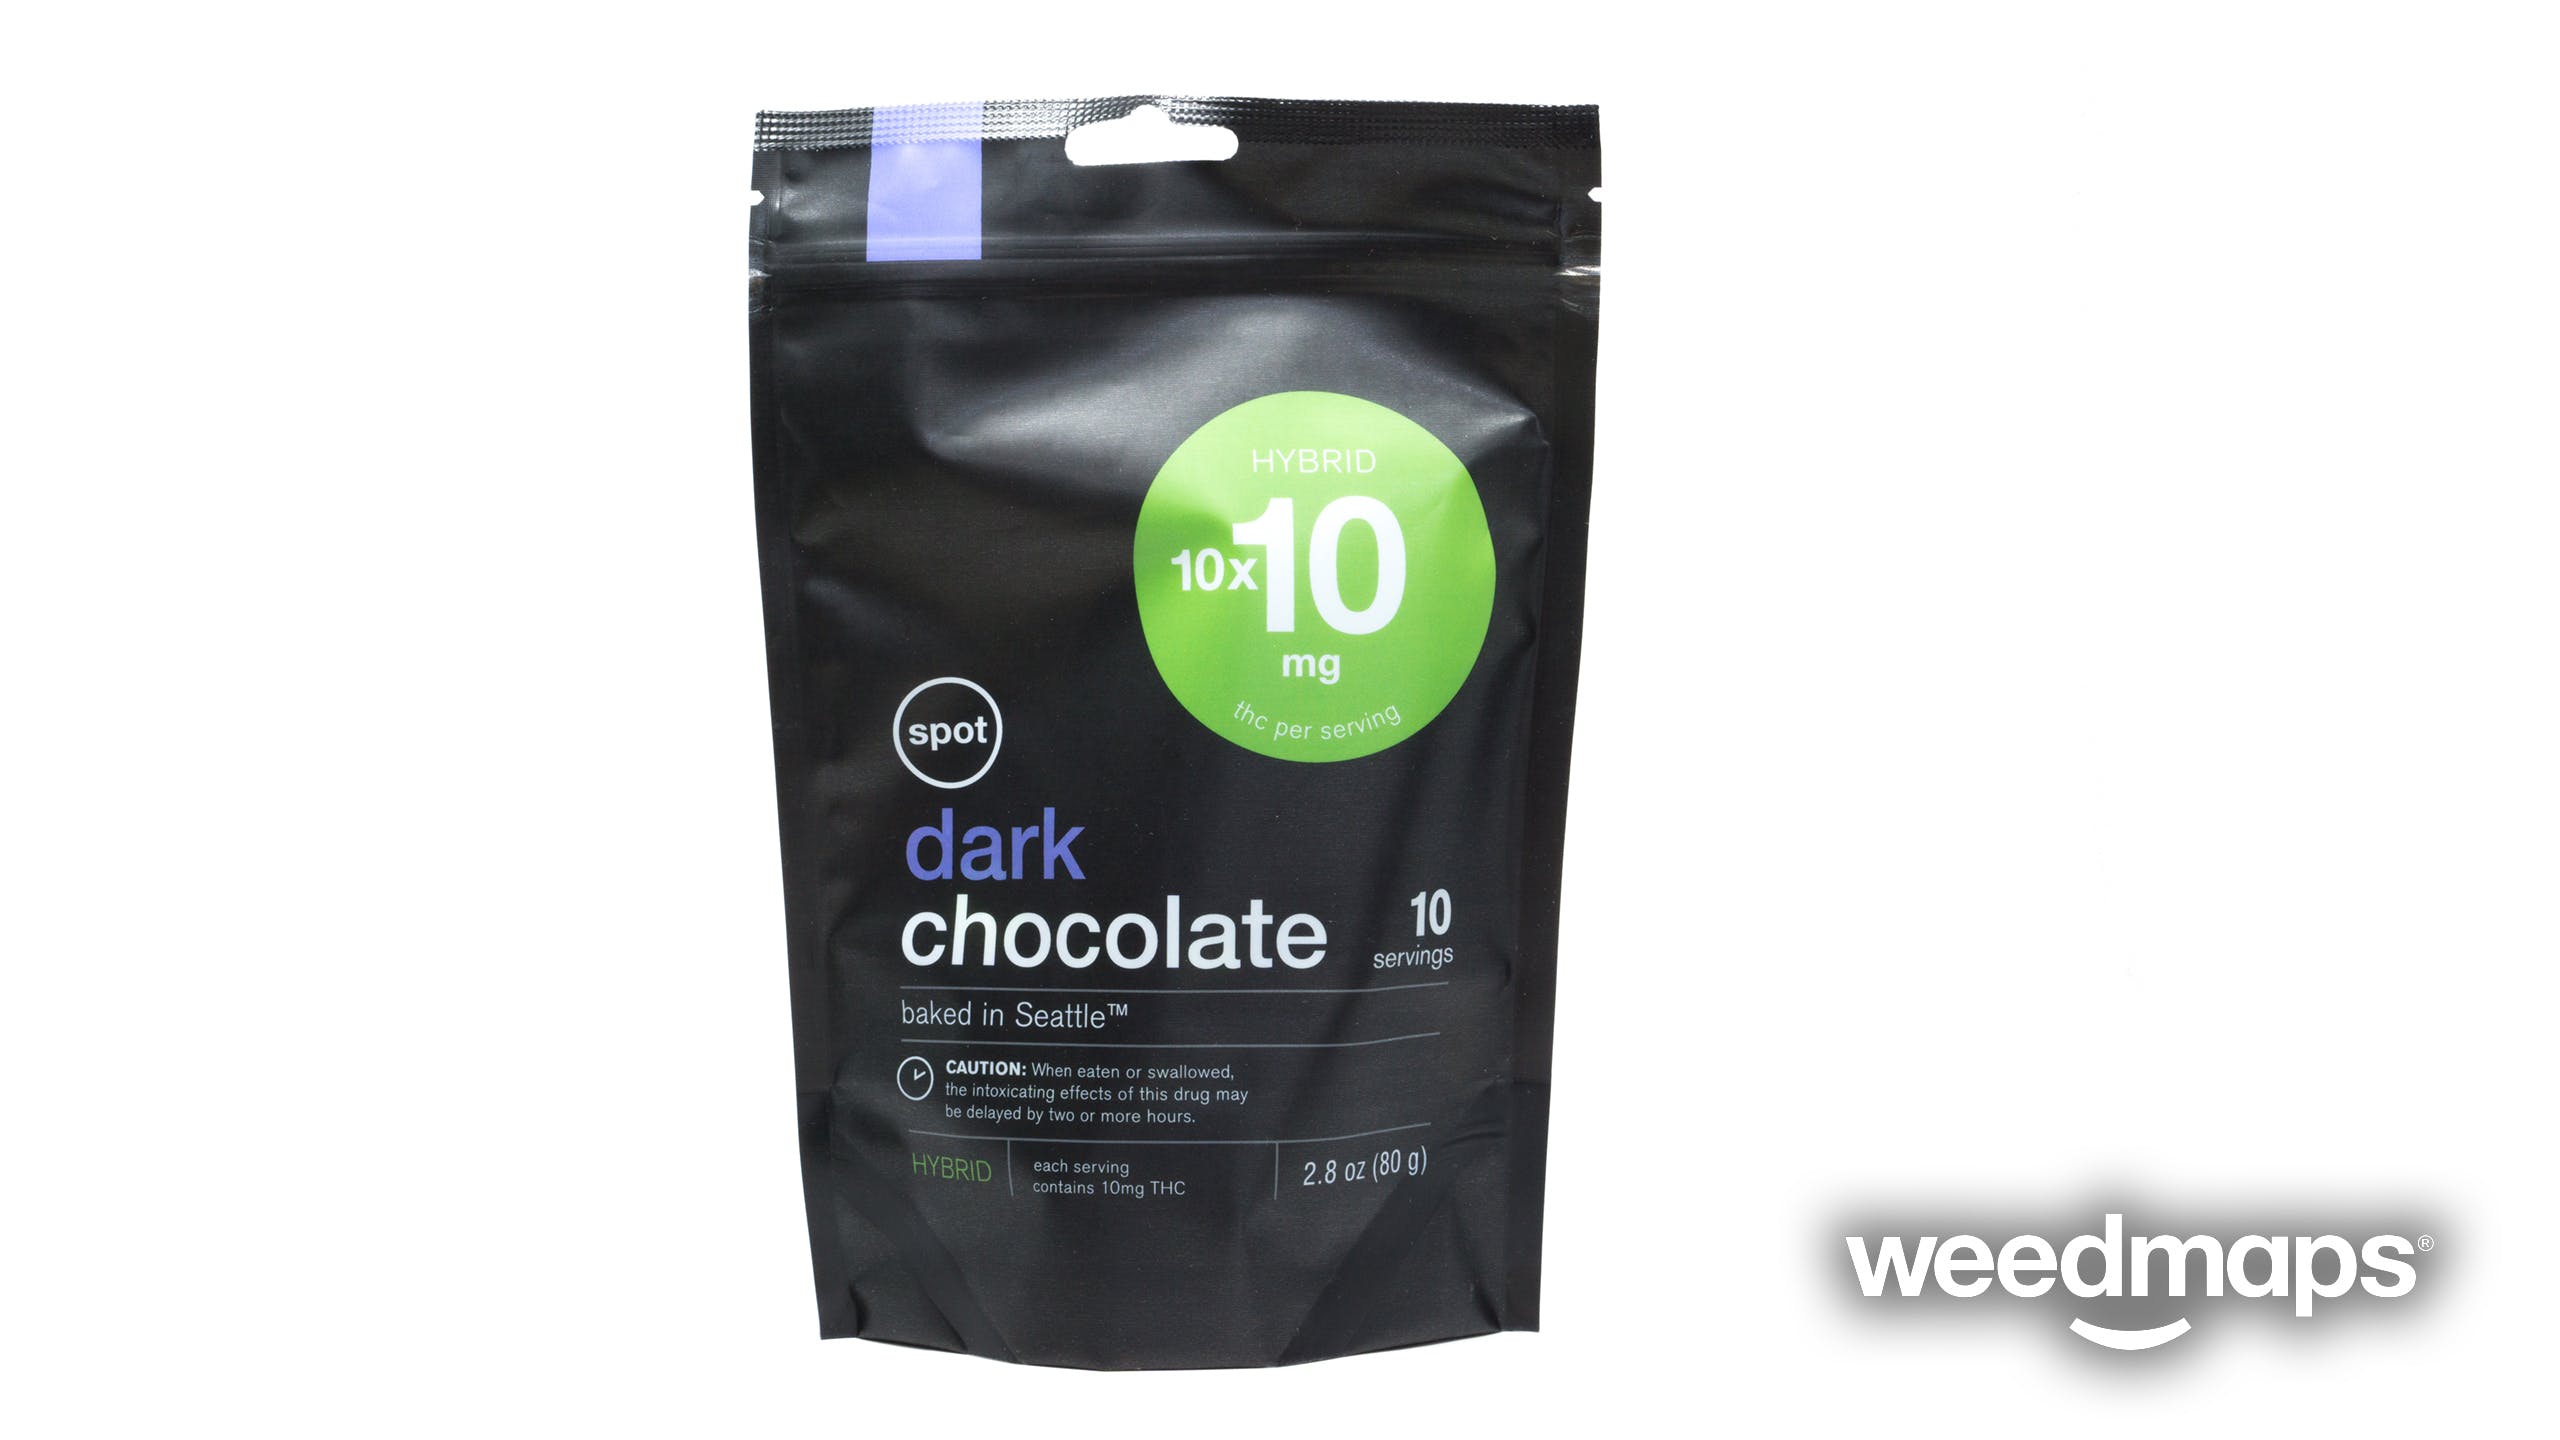 edible-indica-dark-chocolate-squares-10pk-100mg-by-spot